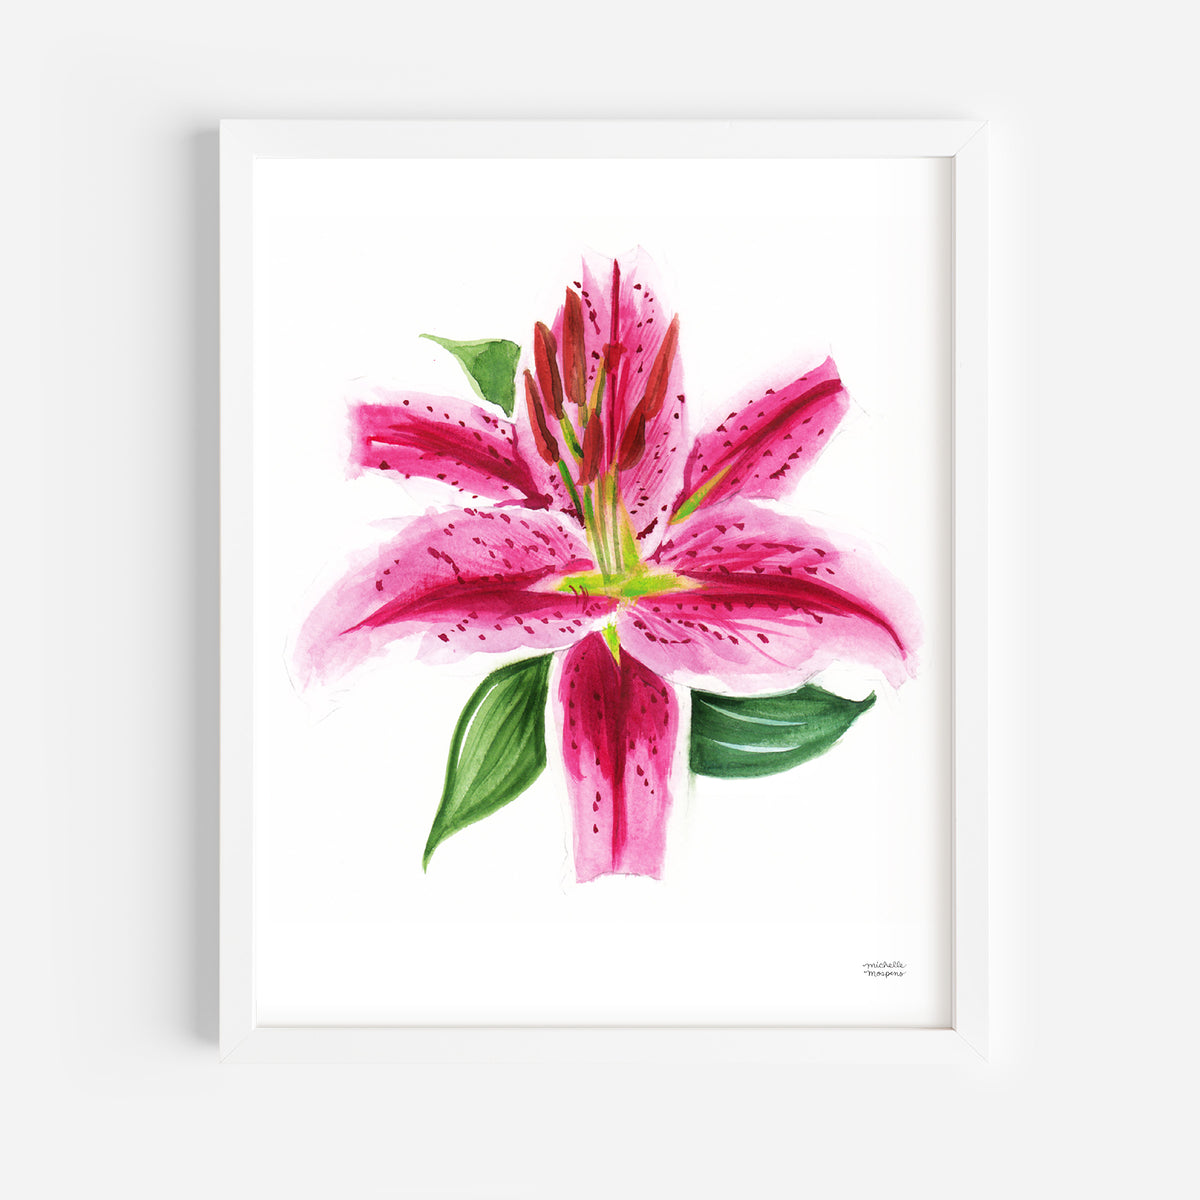 Pink lily flower head, side view Our beautiful pictures are available as  Framed Prints, Photos, Wall Art and Photo Gifts